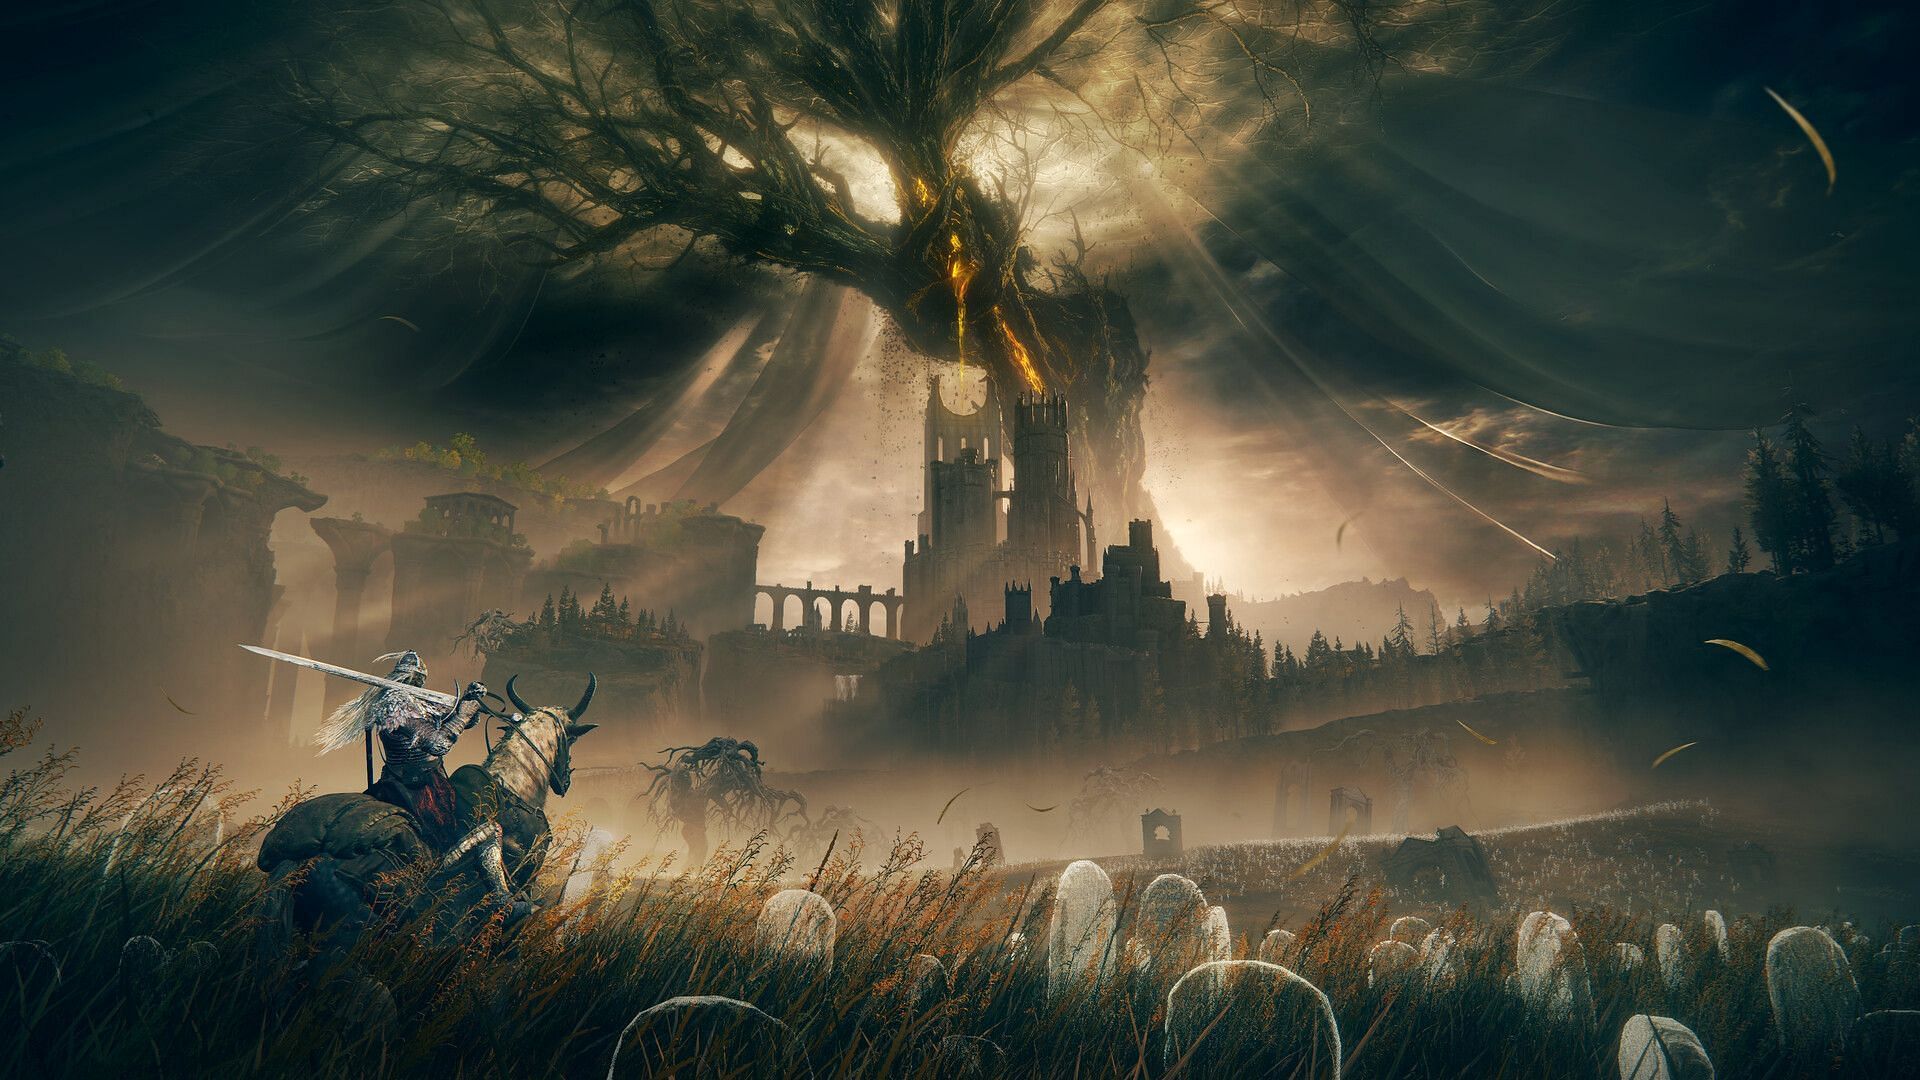 Enter the Shadow of the Erdtree... (image by FromSoftware)